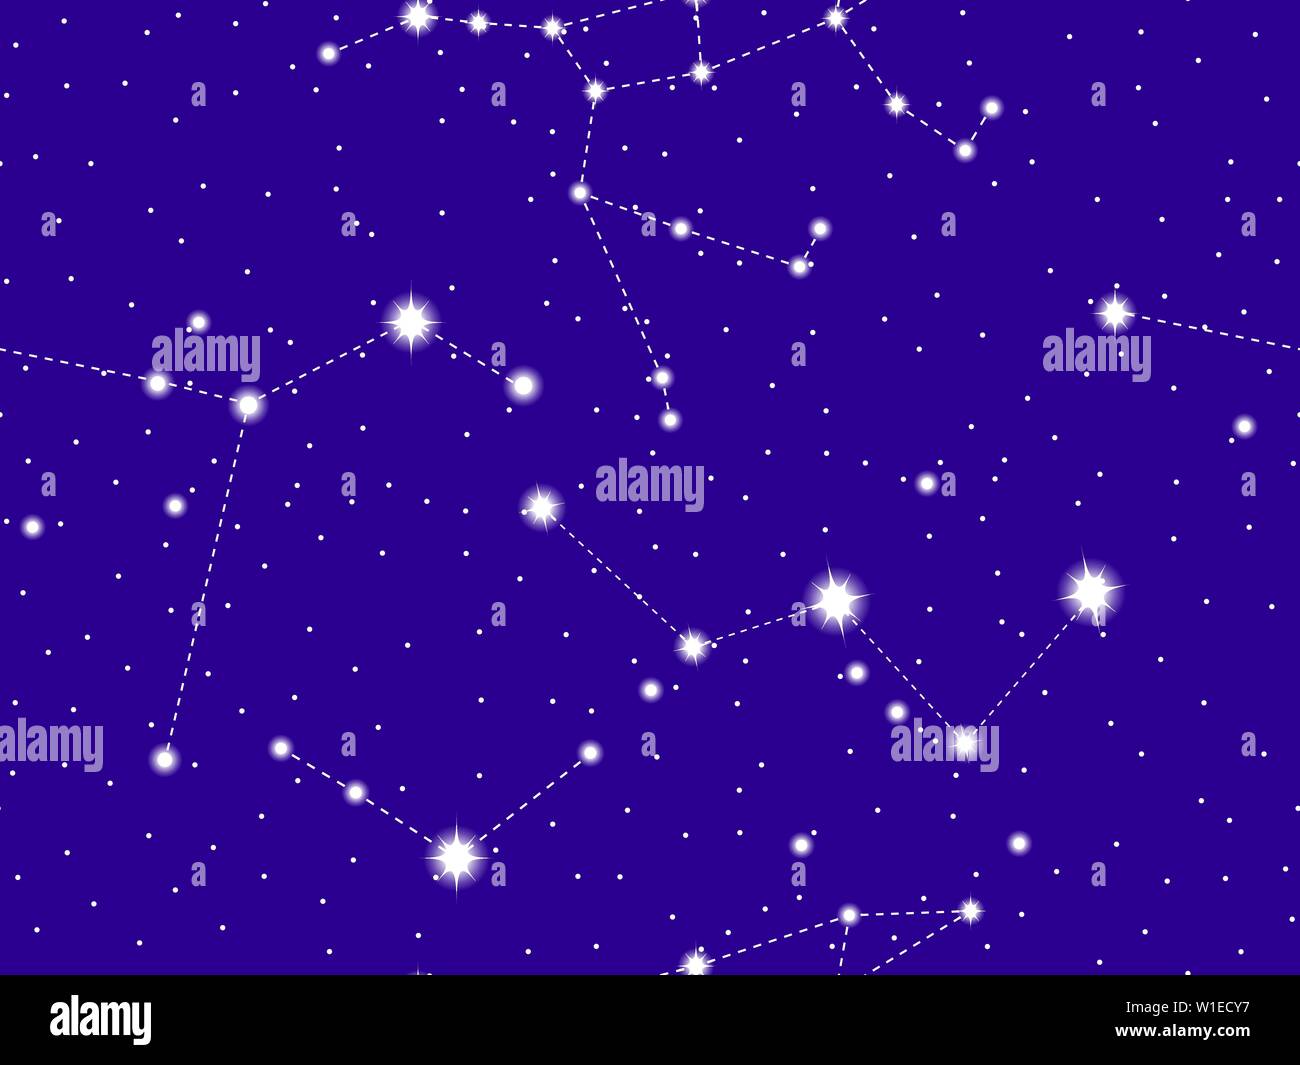 Seamless pattern starry sky with the constellations of Ursa Major, Canes Venatici and Columba. Cluster of stars and galaxies. Deep space. Vector illus Stock Vector